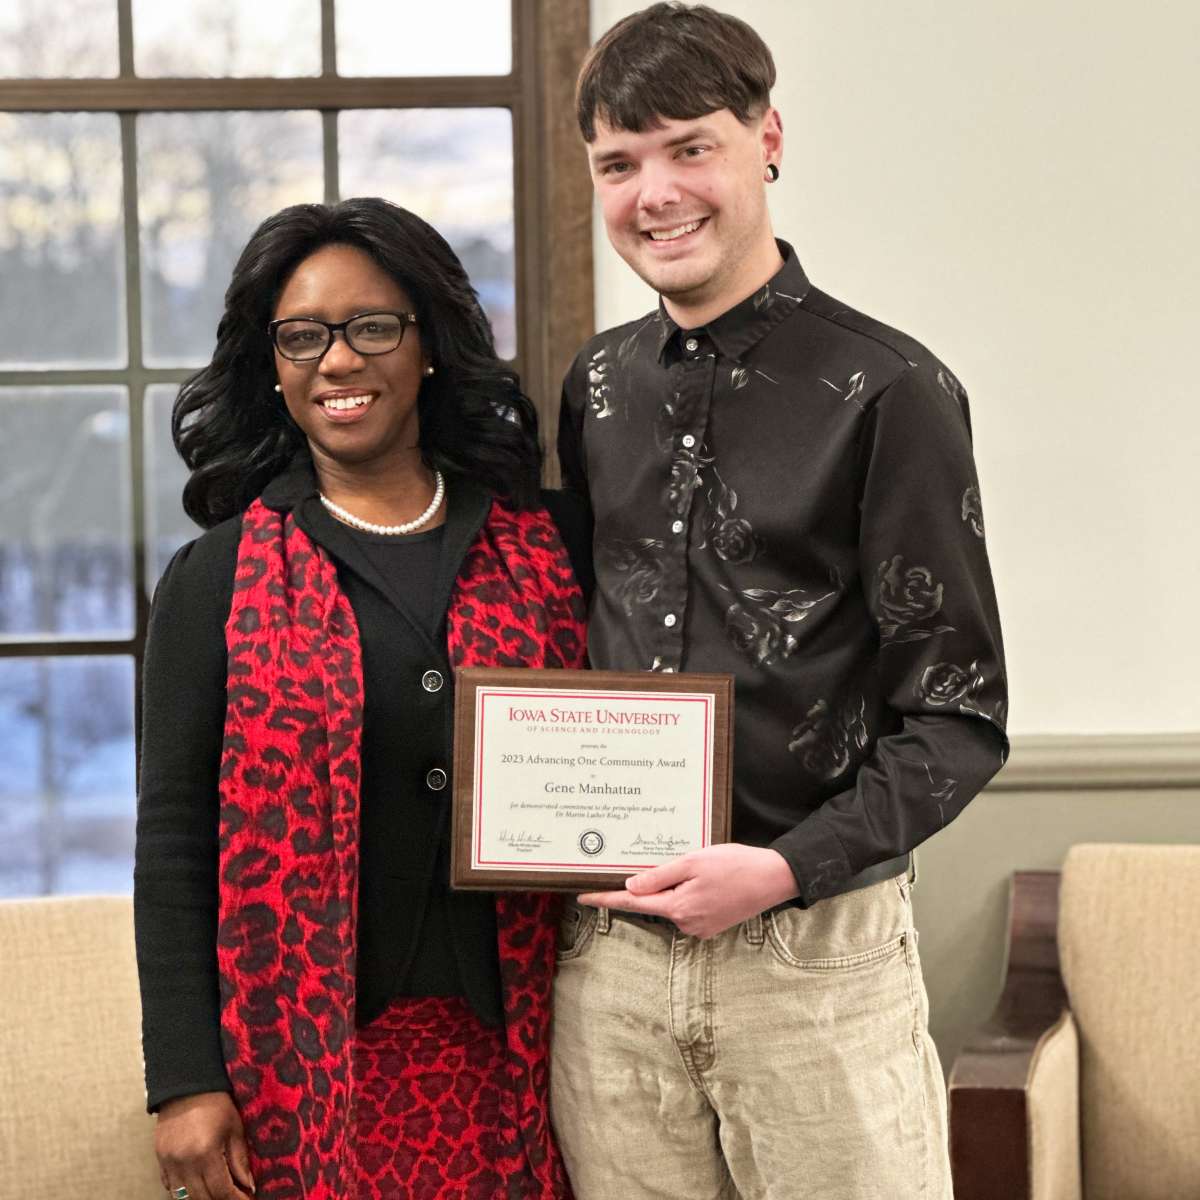 Sharon Perry Fantini, vice president for diversity, equity and inclusion at Iowa State, is pictured with Gene Manhattan, one of the recipients of the 2023 Martin Luther King Jr. Advancing One Community Awards.